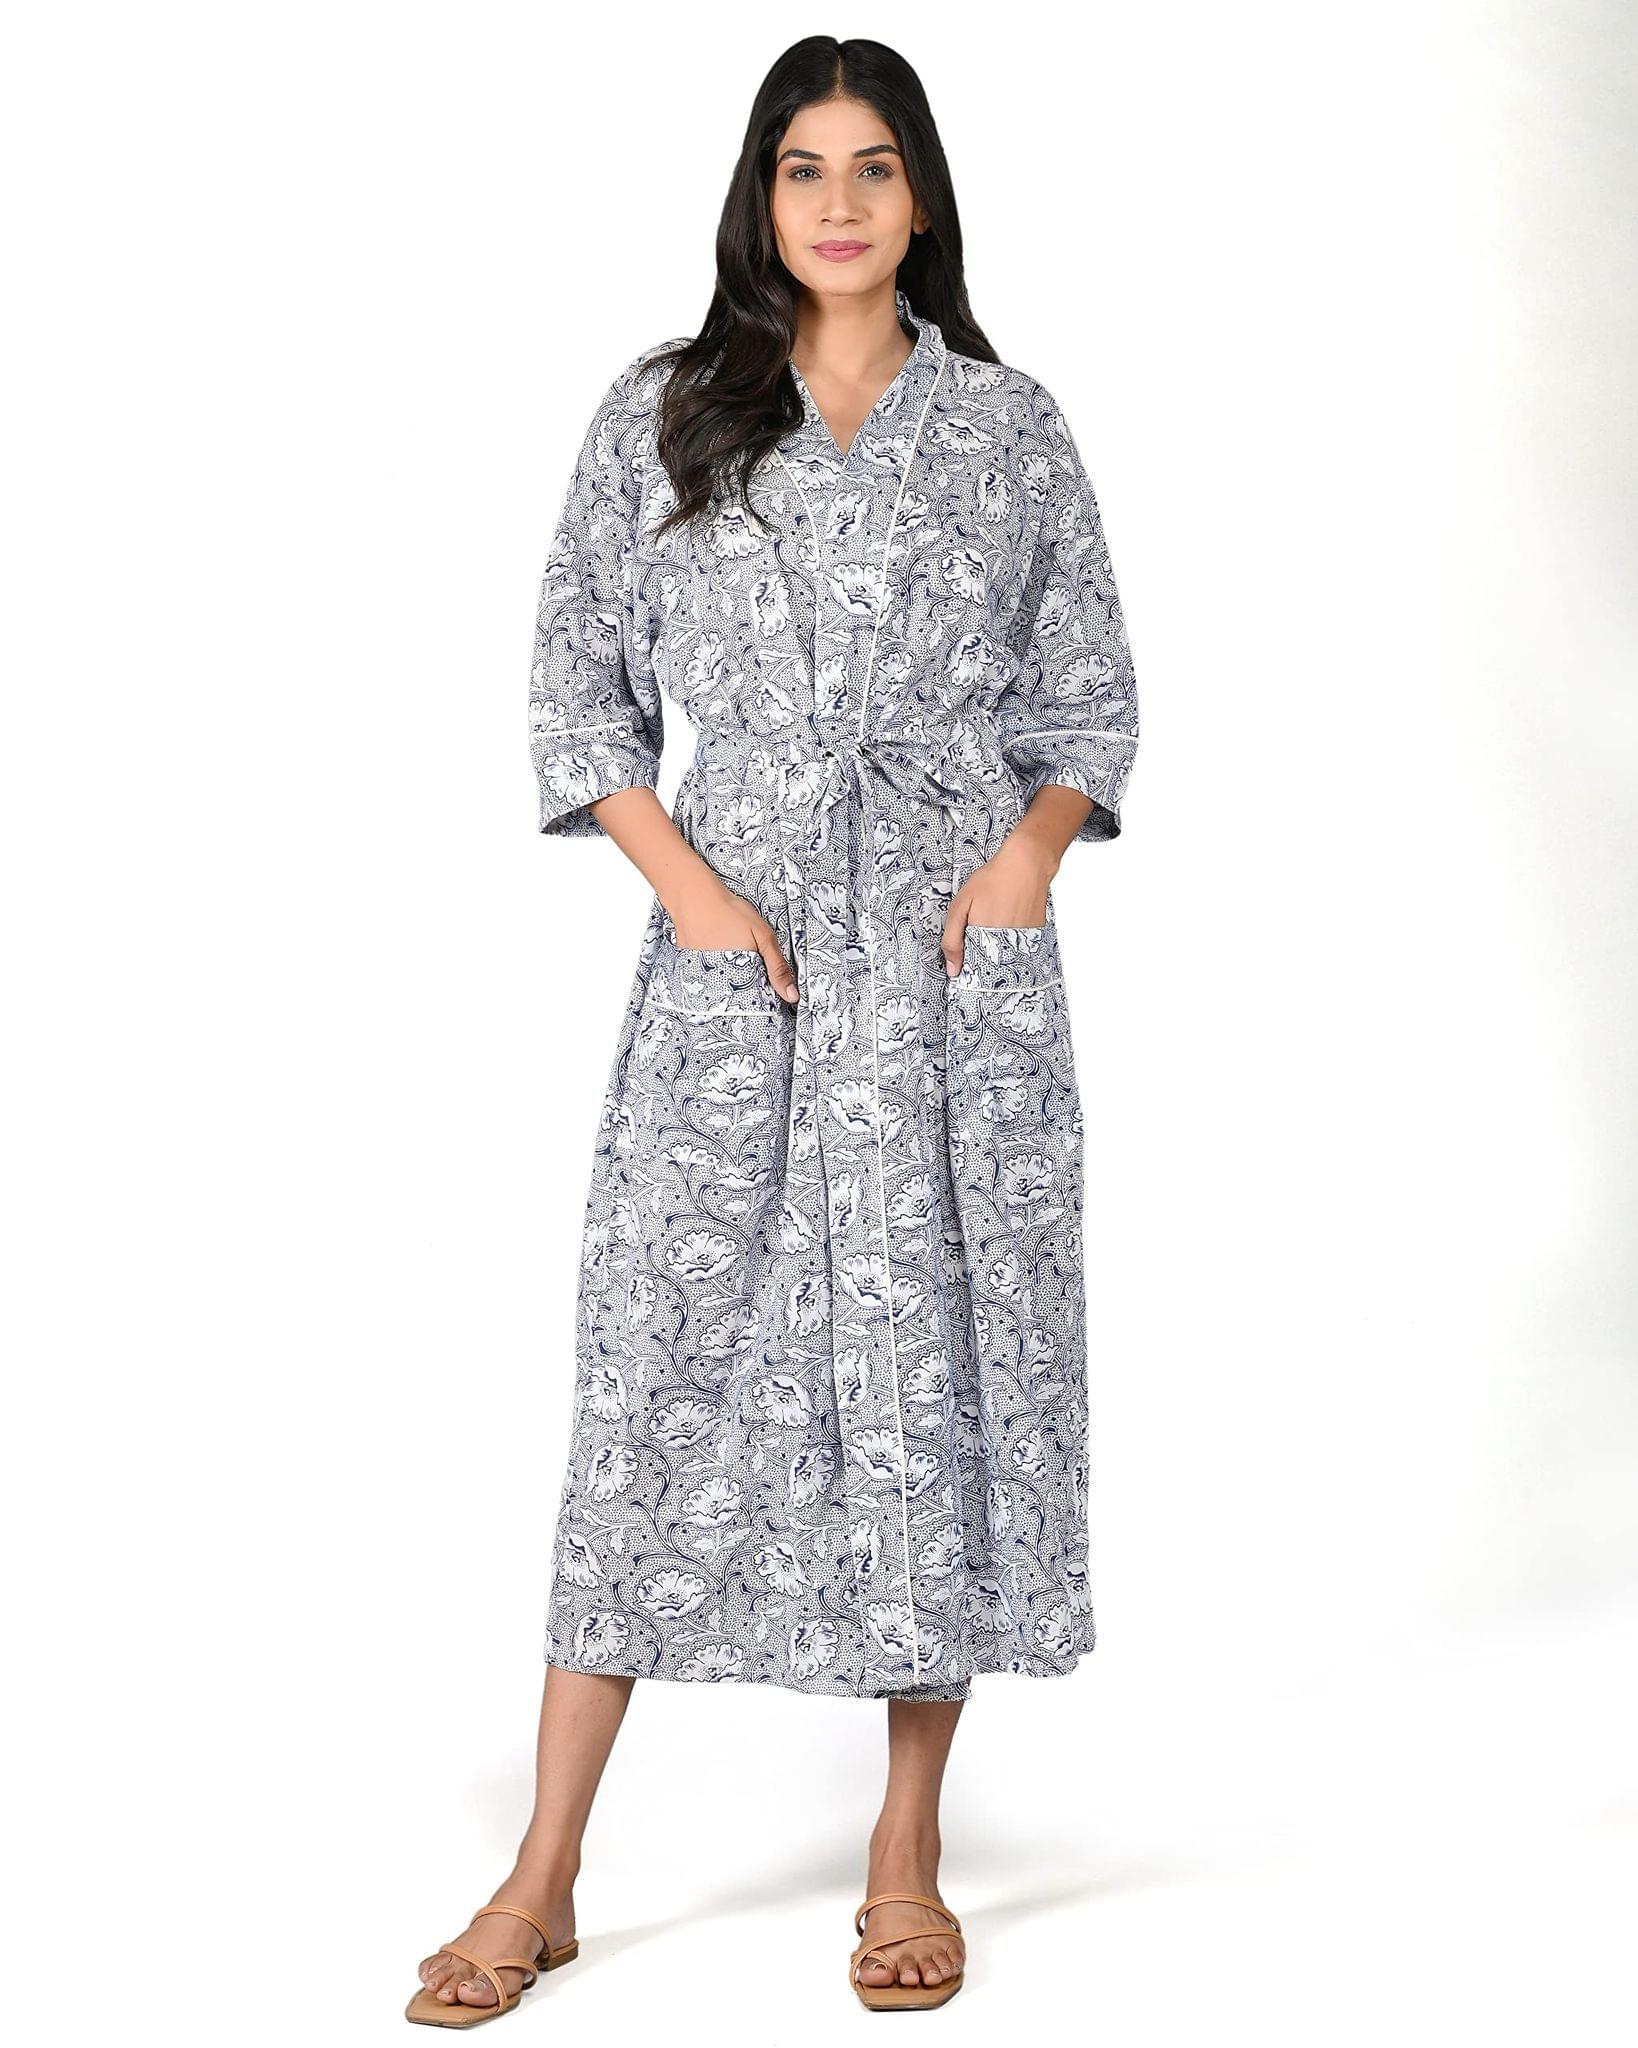 Buy Sanddune Men's Terry Cotton Full Sleeve Knee Length with Pocket Bathrobe  Gown (Grey,Large) Online at Low Prices in India - Amazon.in